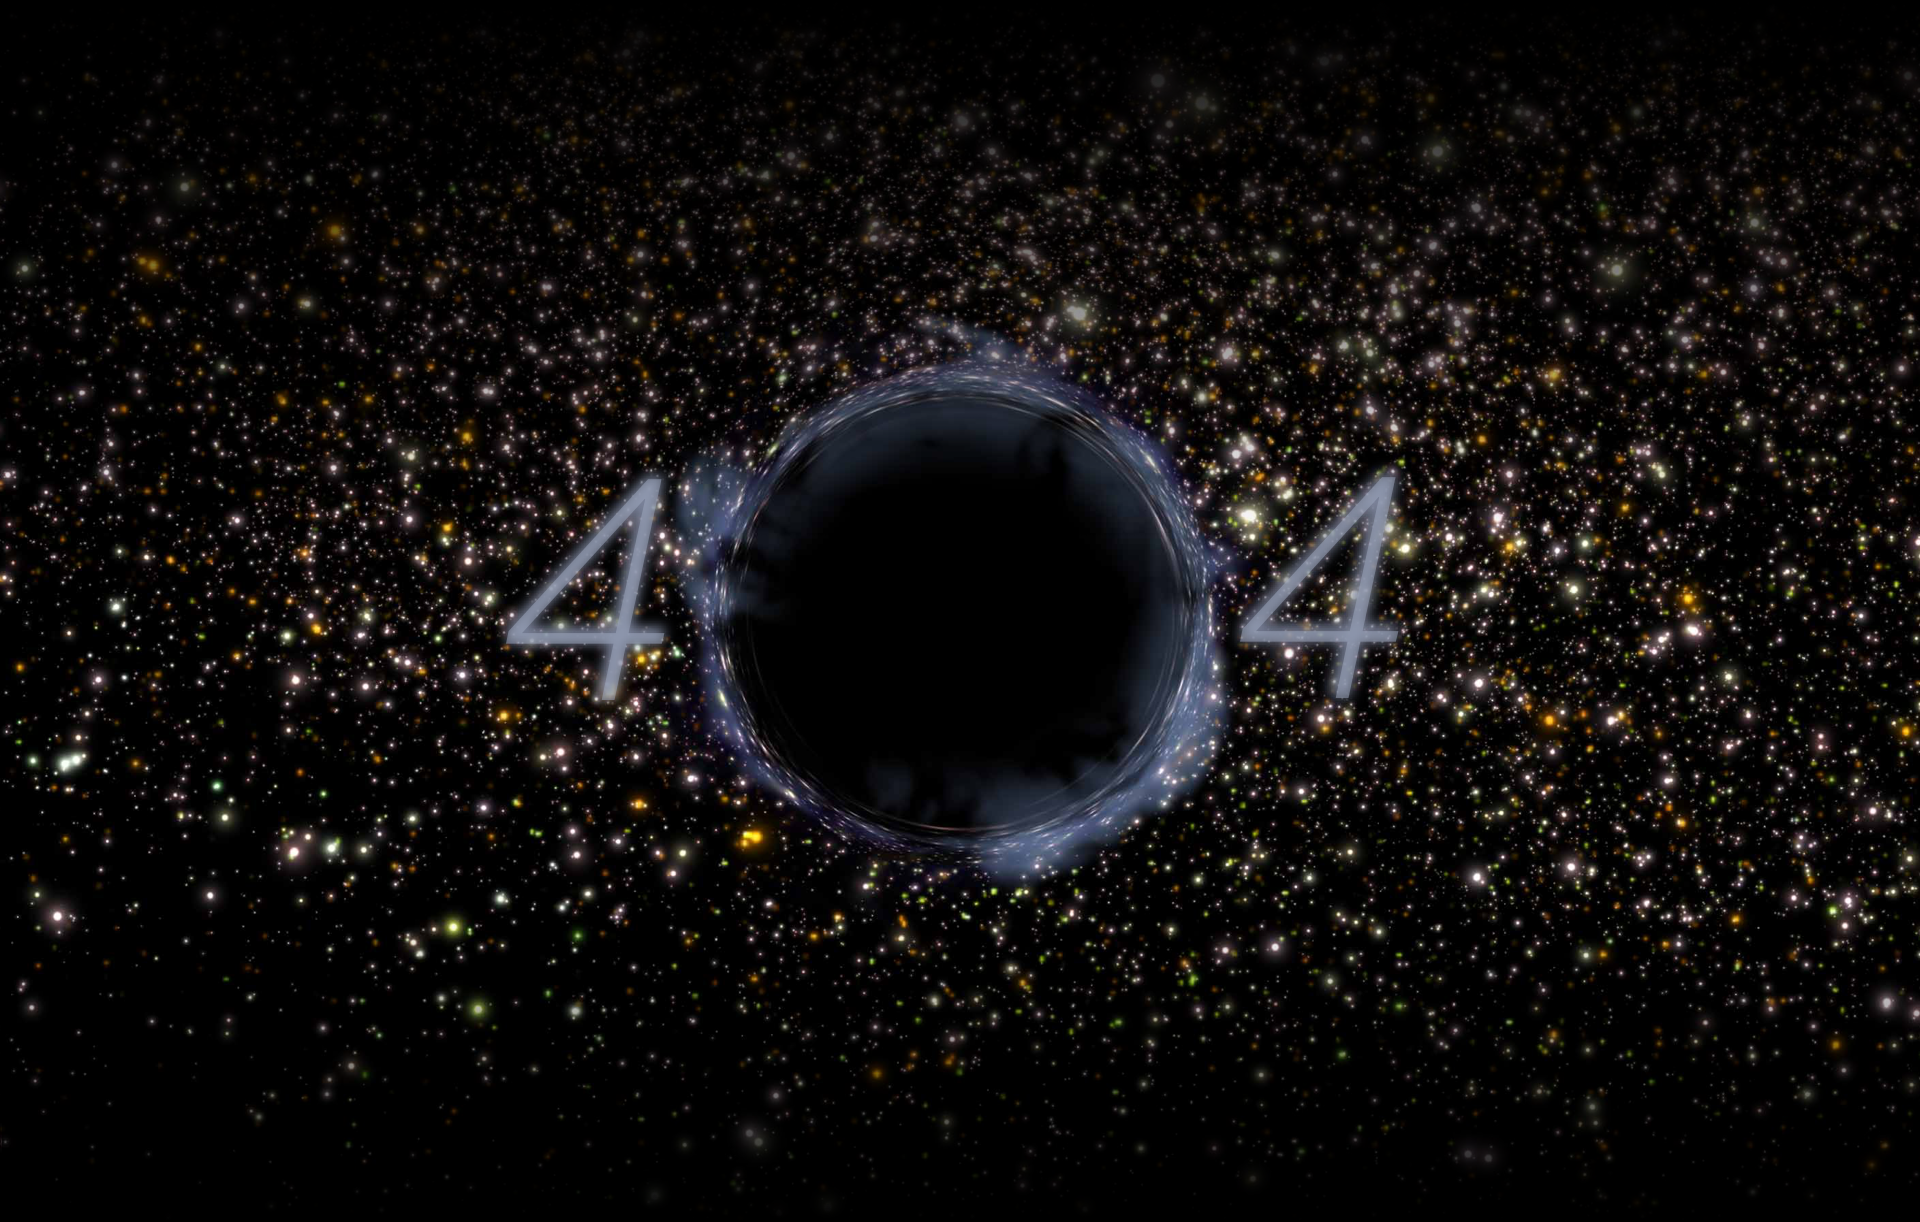 A 404 written on top of an background of stars and galaxies. The stylized "0" is an artist's impression of a black hole.